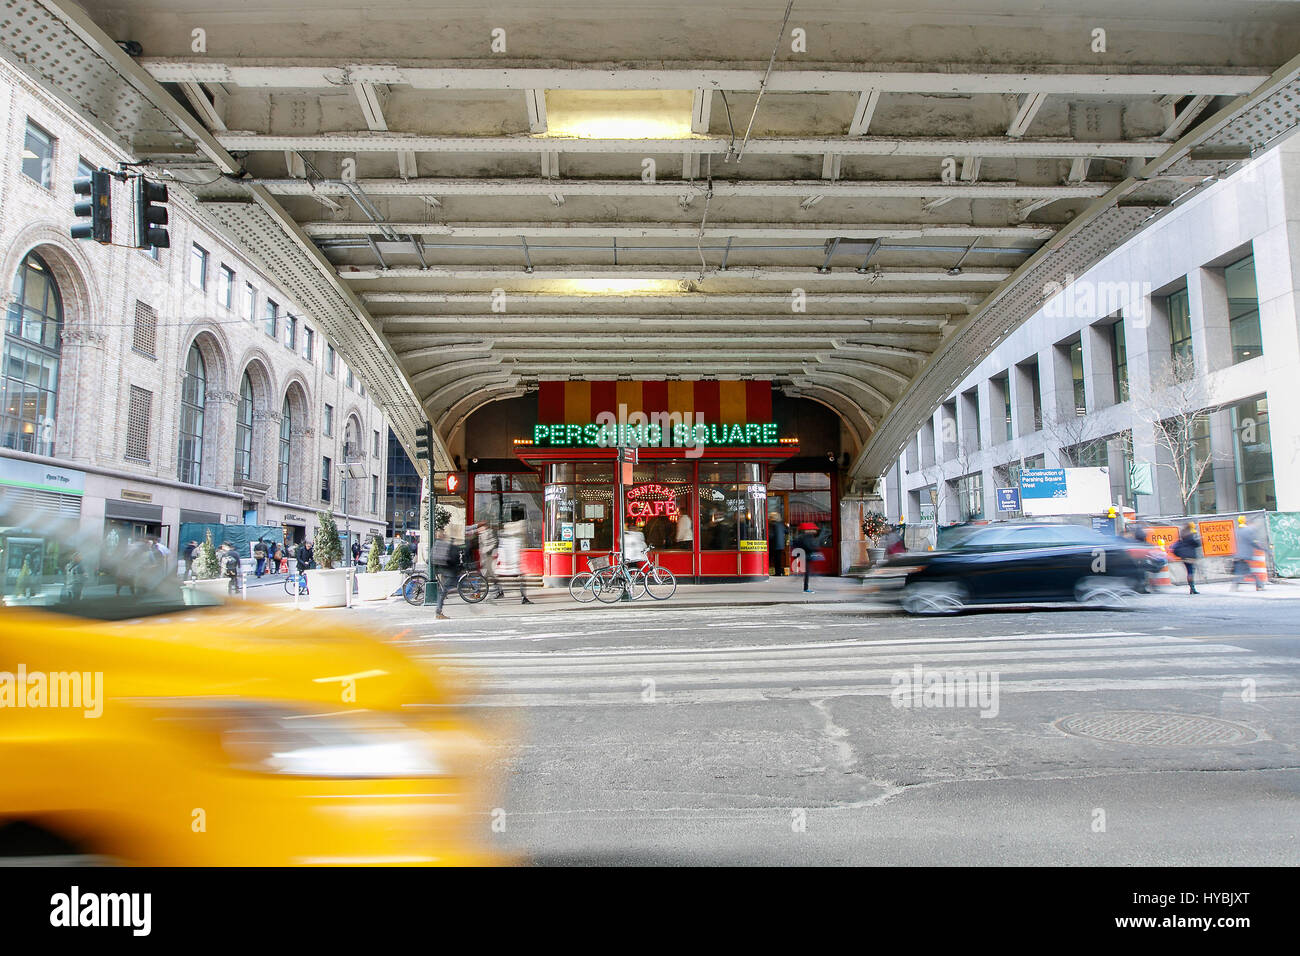 Blurred view of taxis moving along the 42nd street at Pershing Square. Stock Photo